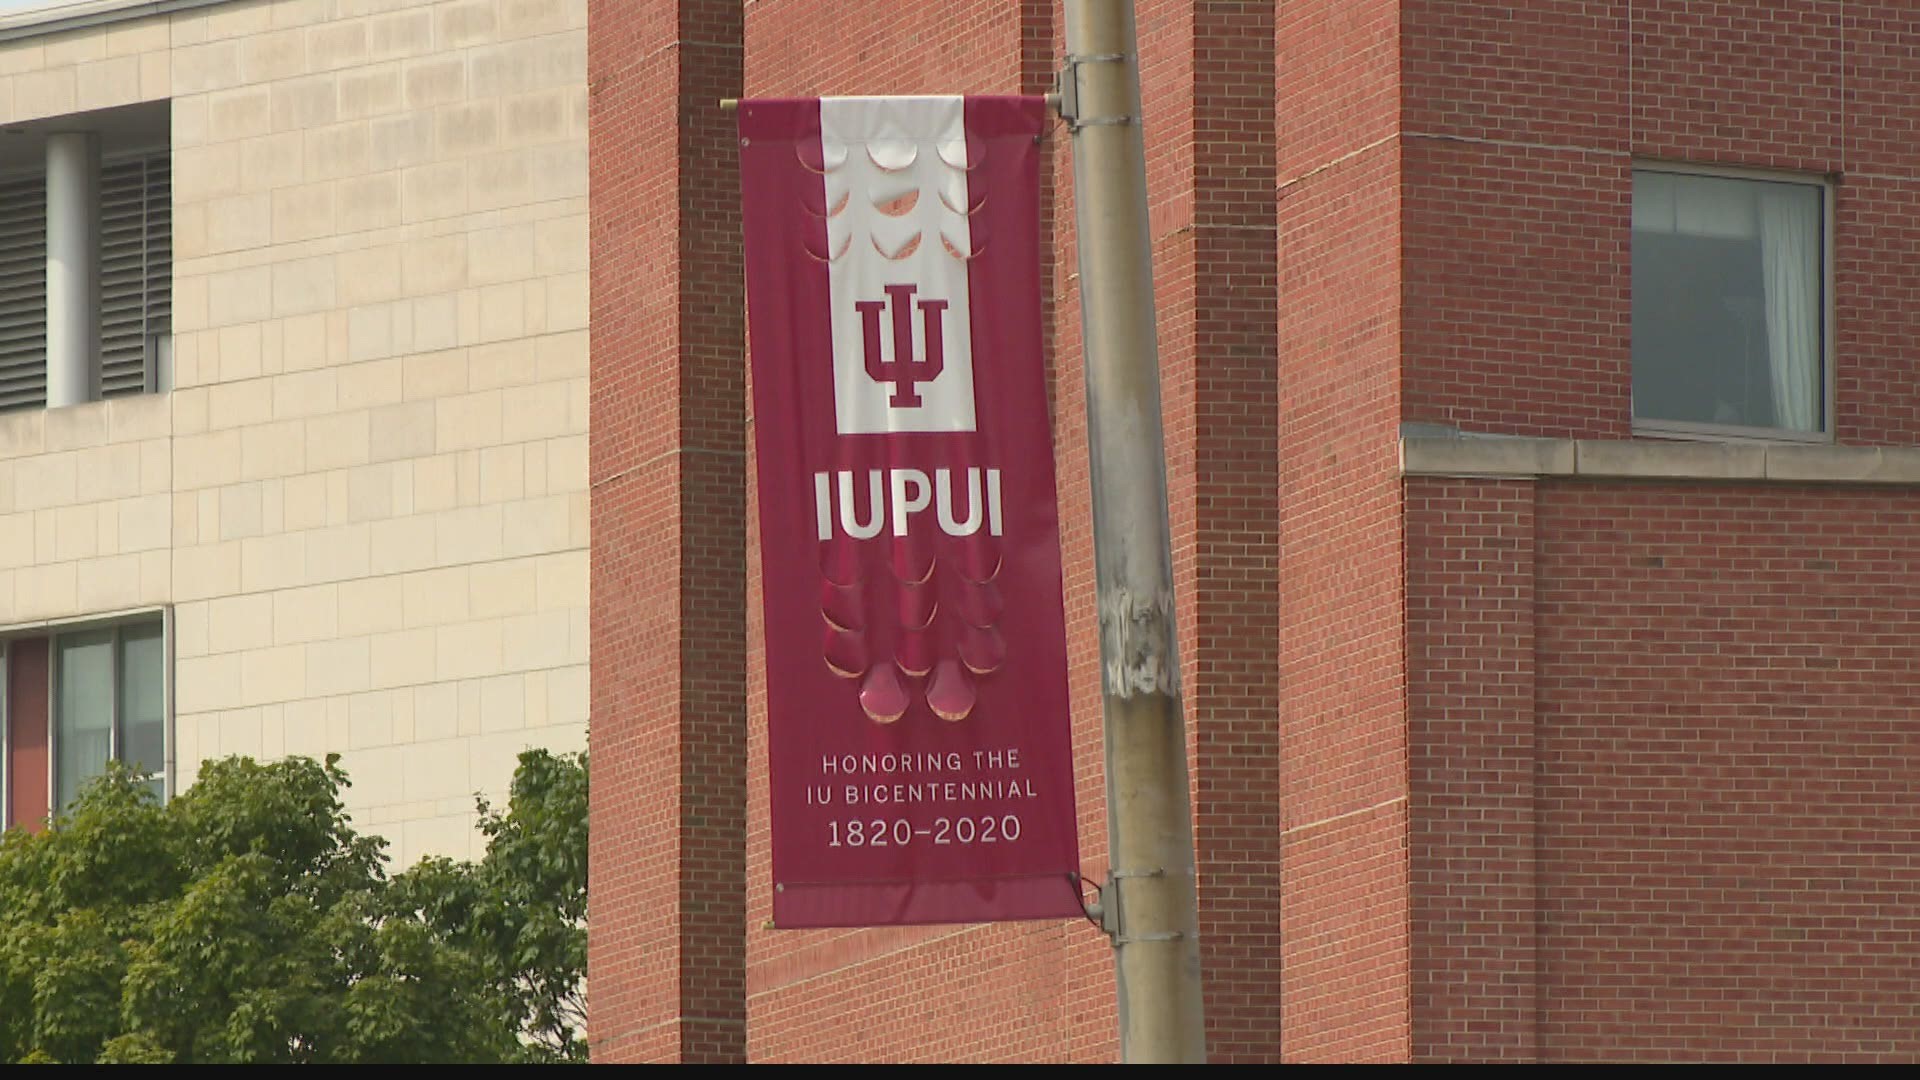 IUPUI students are asking for increased safety measures after a number of sexual assaults have been reported on campus.